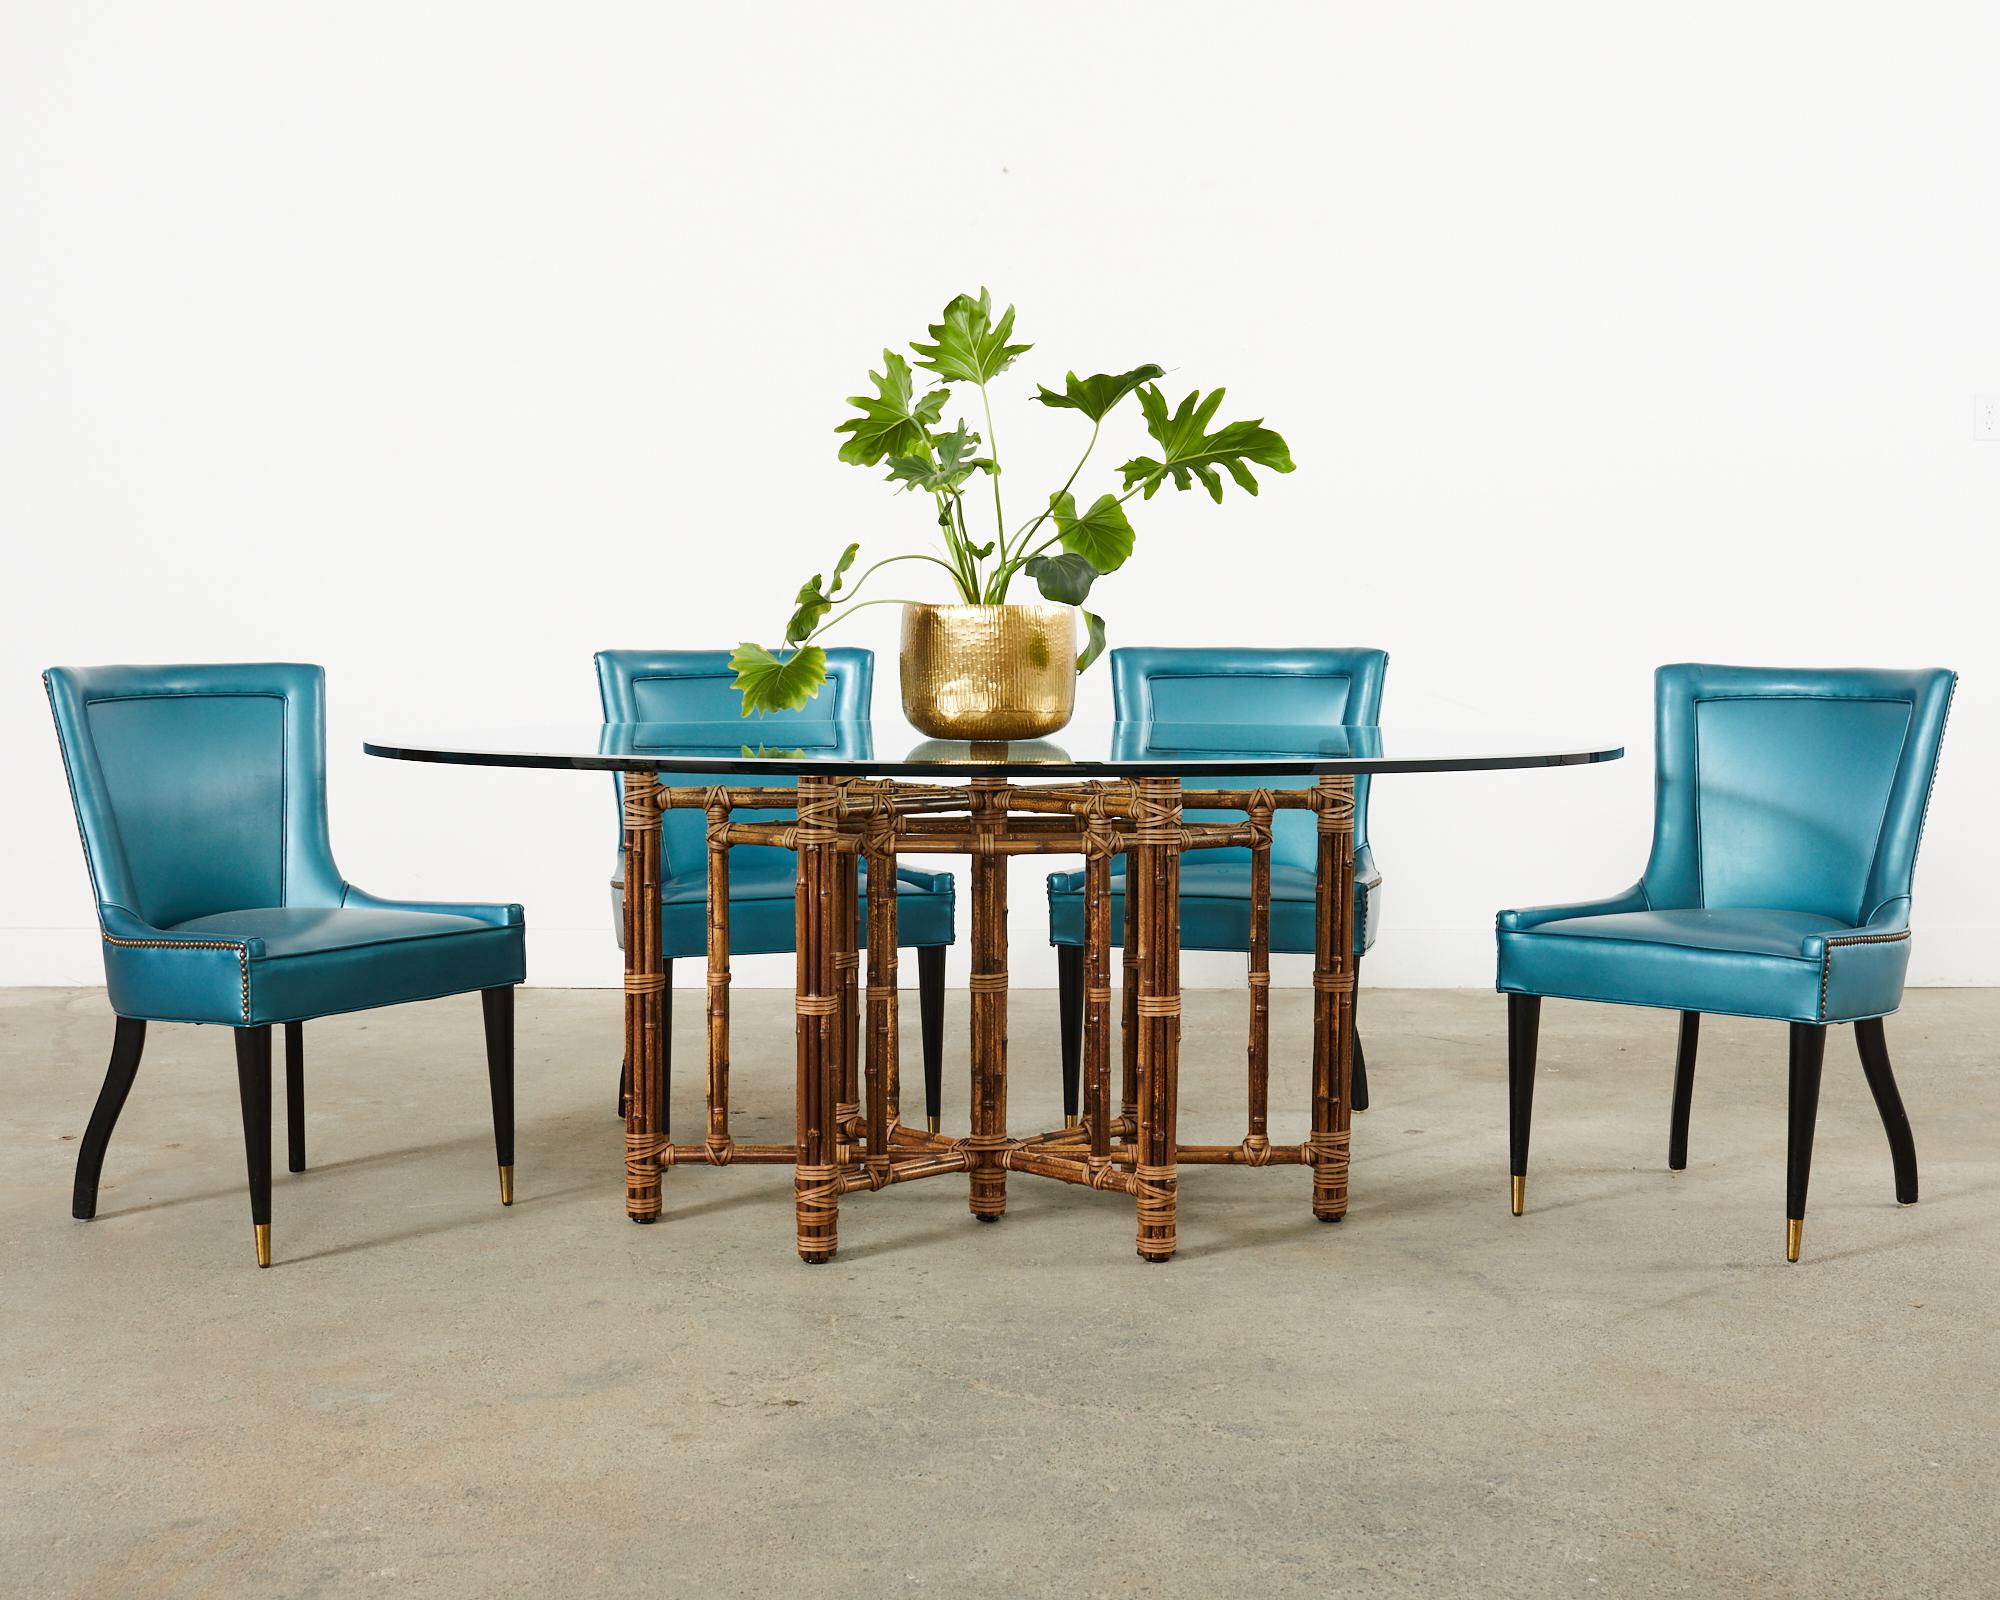 Attractive set of four mid-century modern space age style dining chairs crafted in Italy. The chairs feature a wooden frame upholstered with a modern metallic style teal naugahyde fabric. The seats have patinated brass tack nail heads bordering the